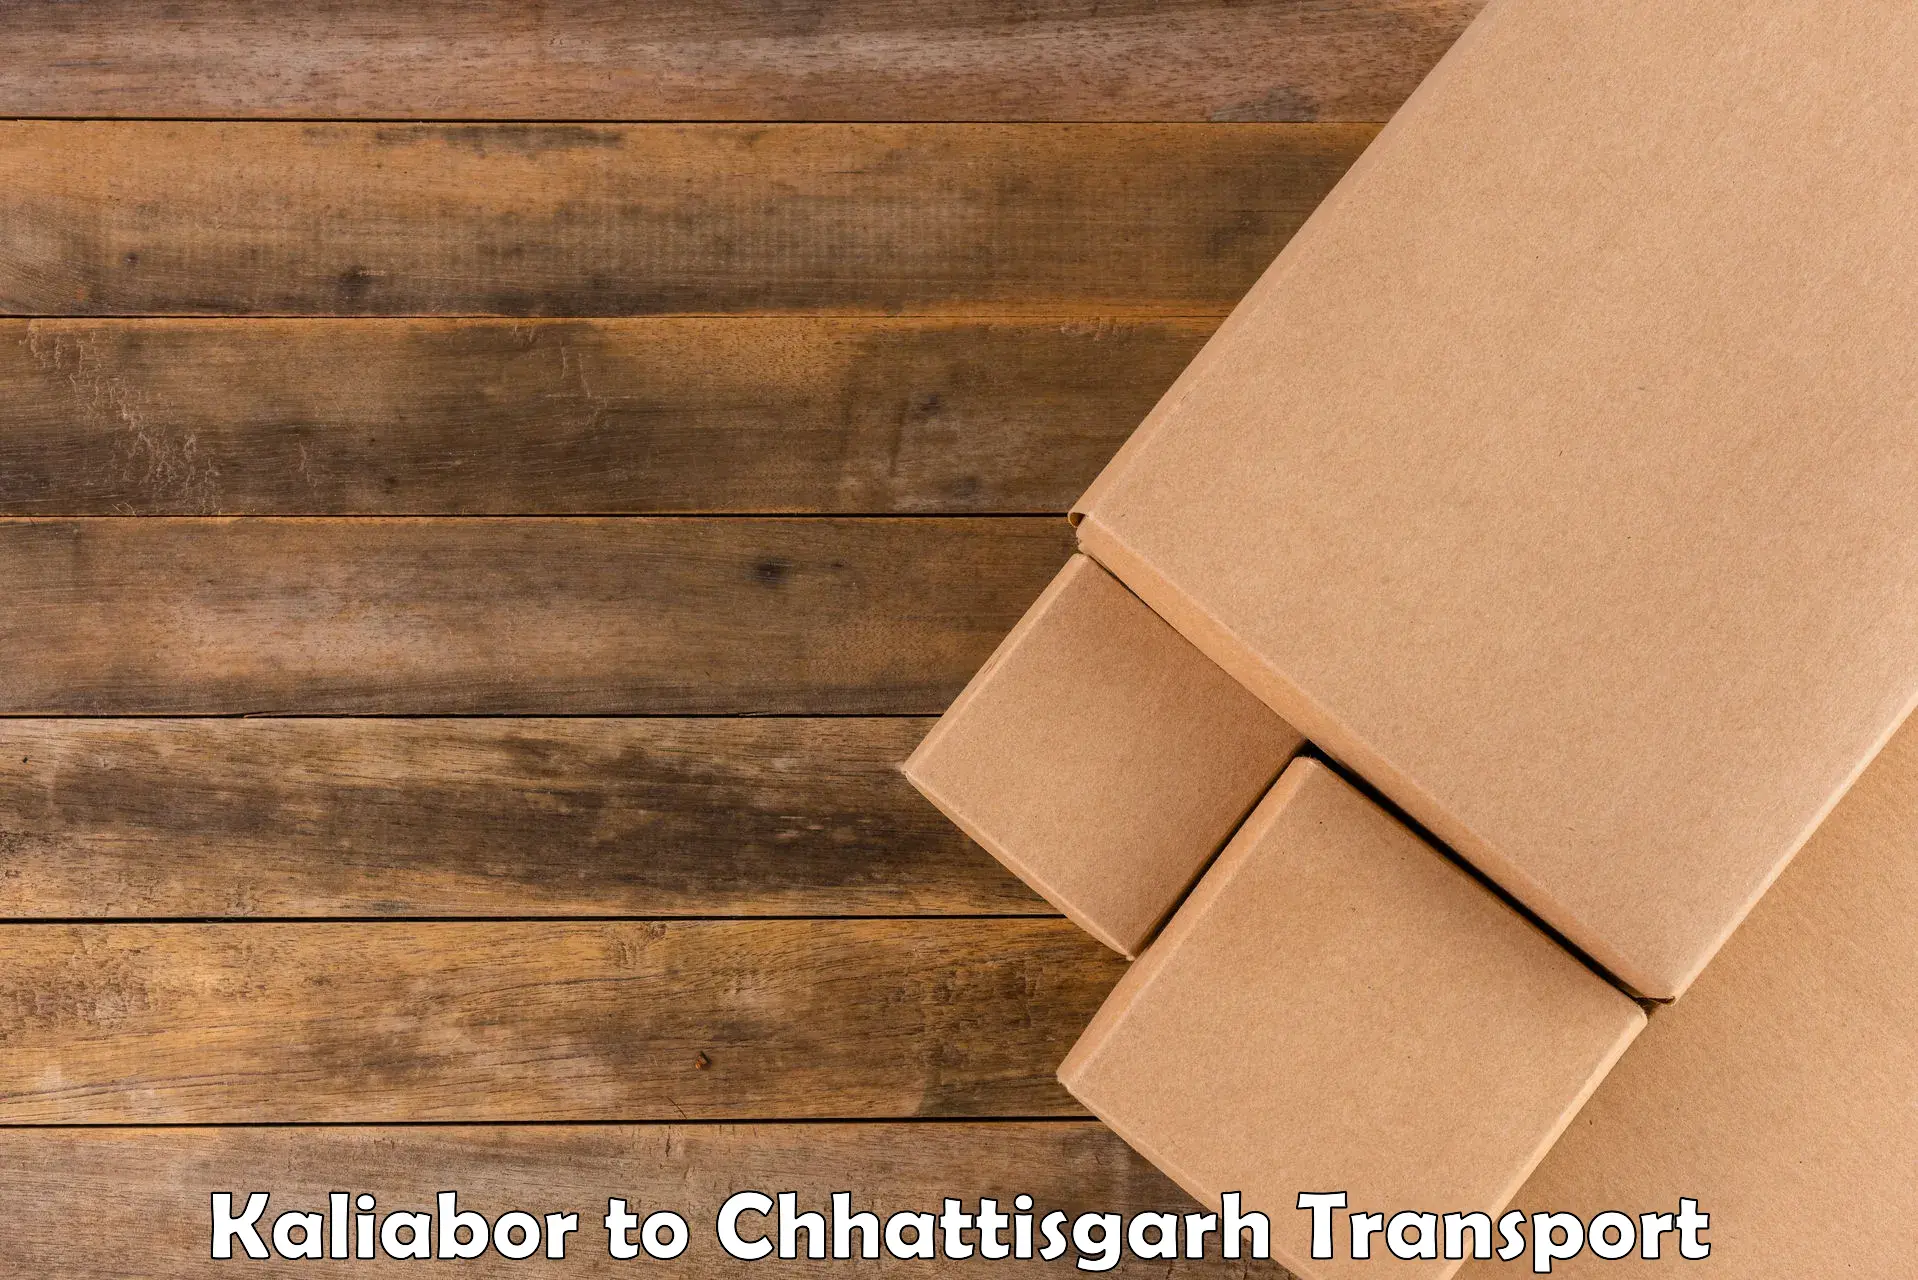 Air freight transport services Kaliabor to Raigarh